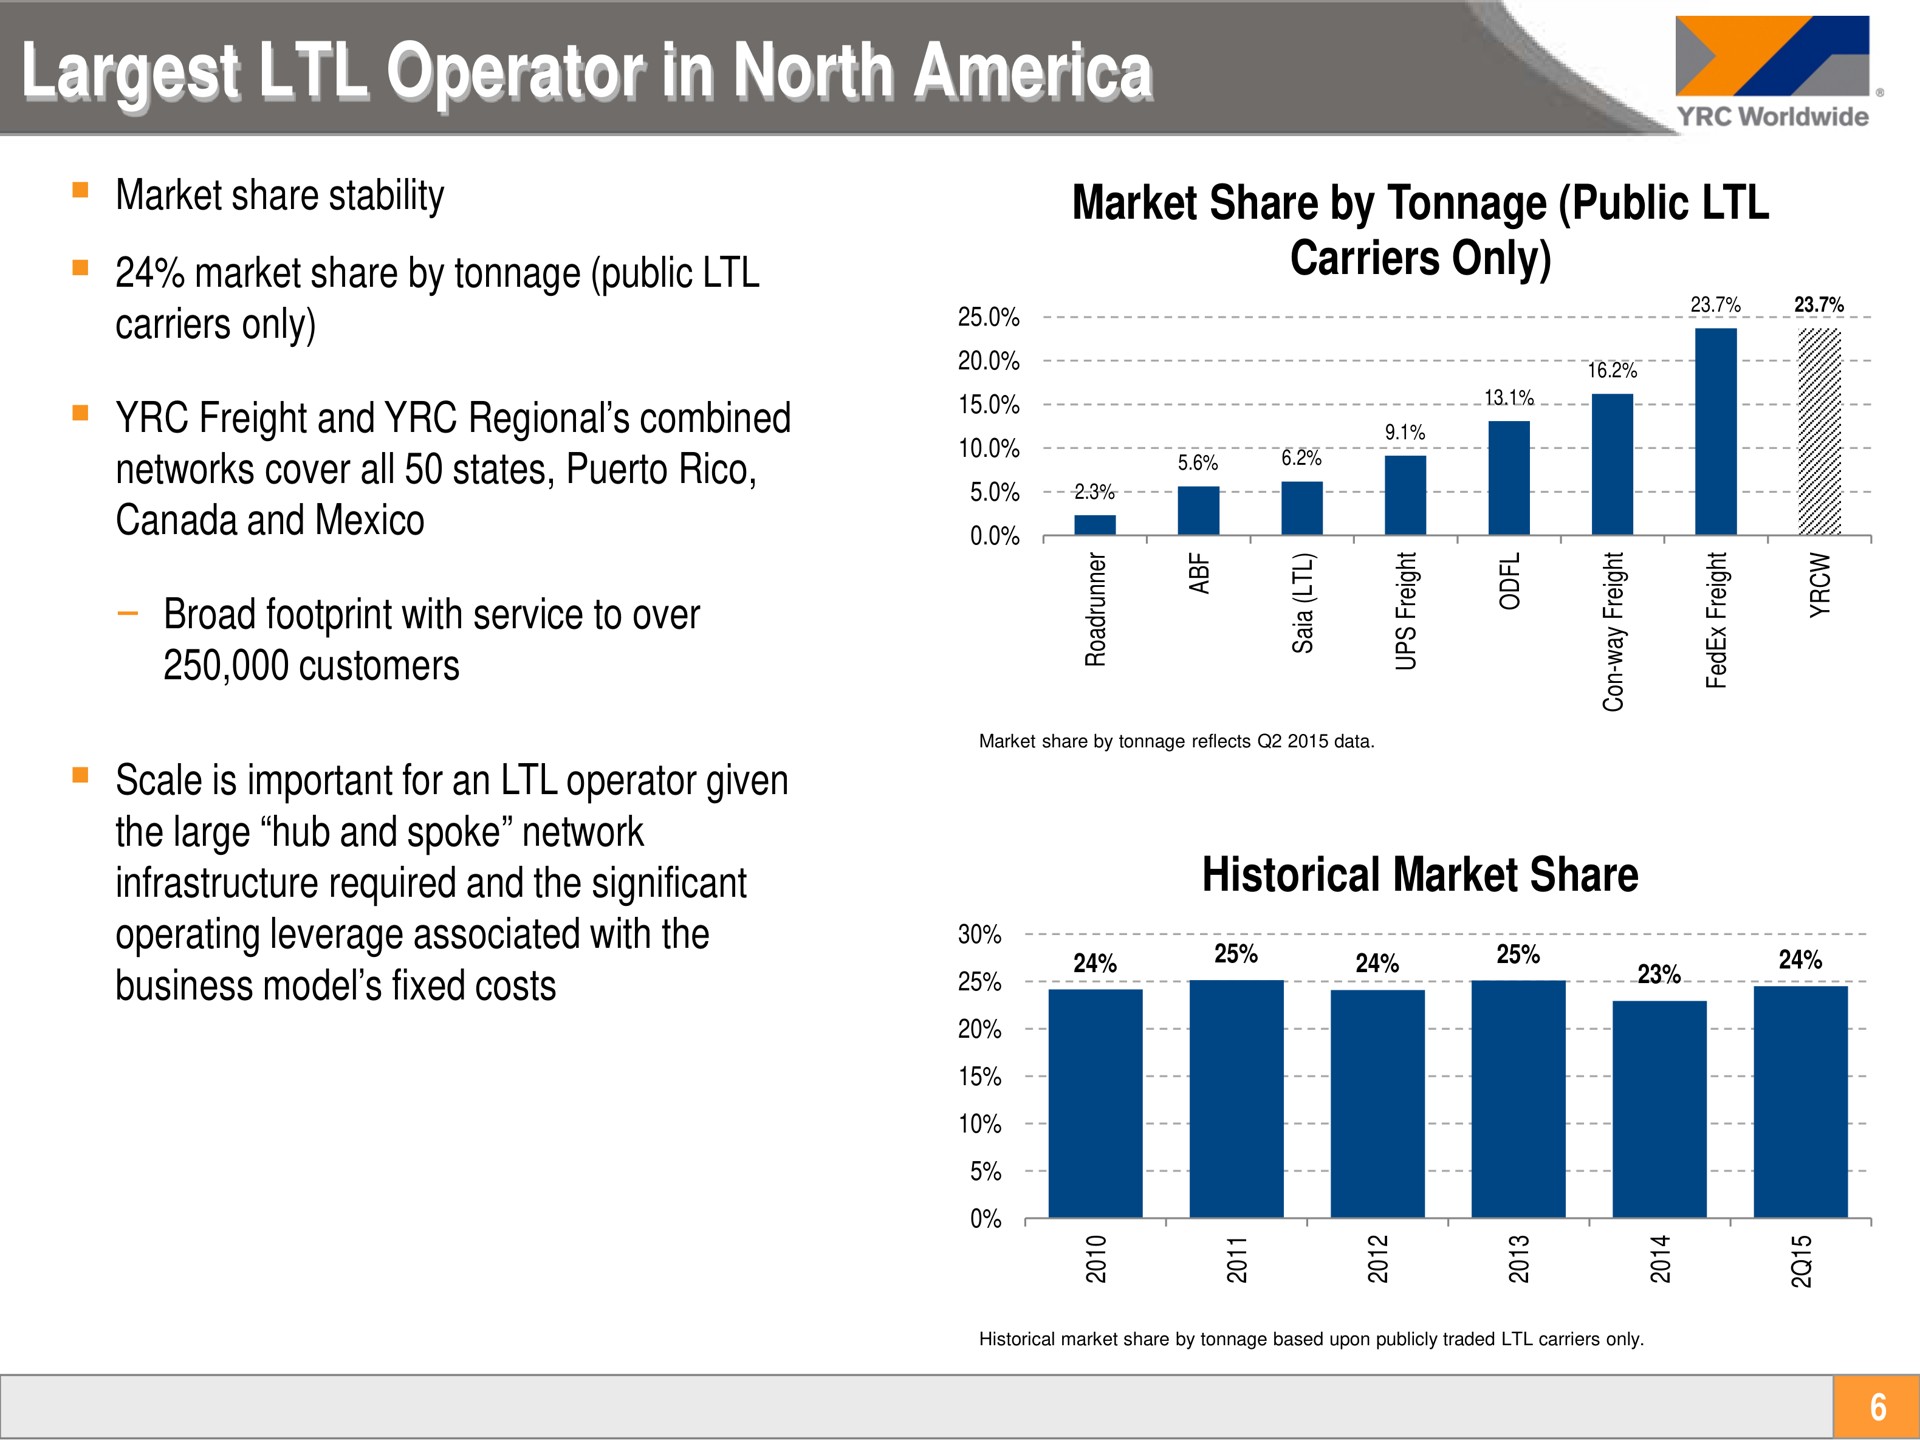 operator in north market share by tonnage public carriers only historical market share stability freight and regional combined networks cover states canada and infrastructure required and the significant a pee | Yellow Corporation